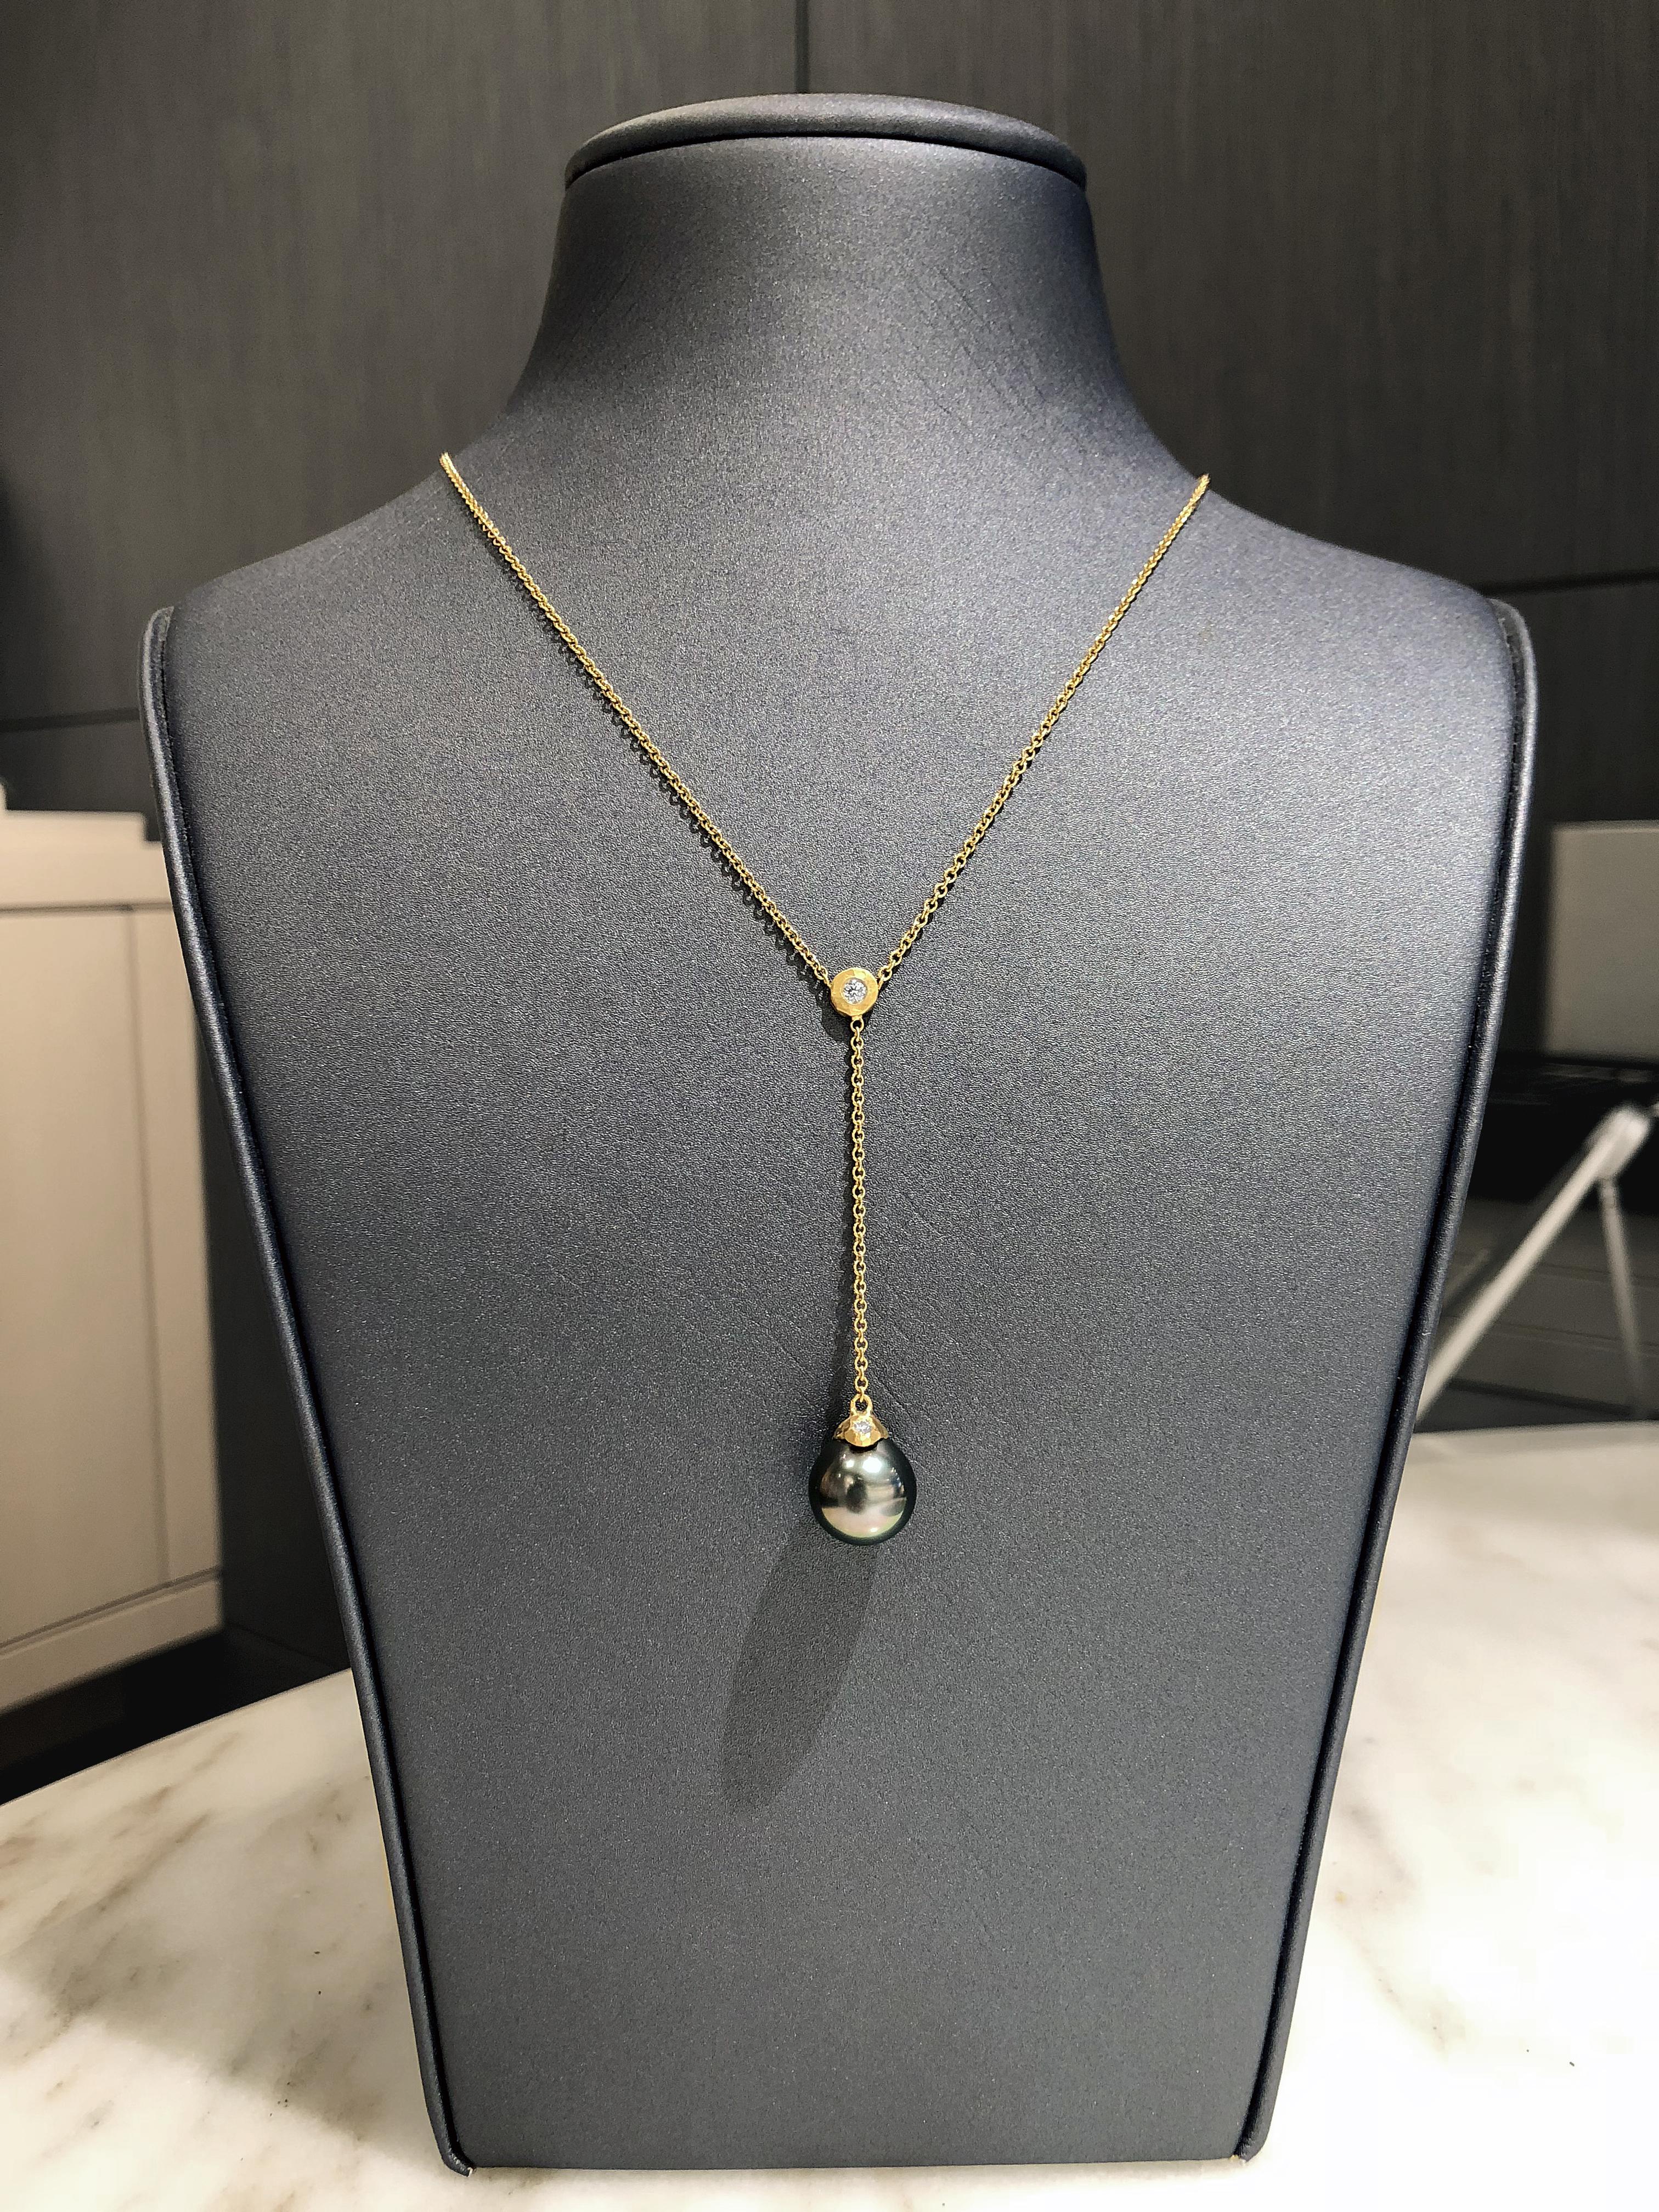 One of a Kind Drip Cap Lariat Necklace handcrafted by award winning jewelry artist Pamela Froman in her signature-finished, hand-hammered 18k yellow gold featuring a spectacular, lustrous Tahitian pearl accented with two round brilliant-cut white